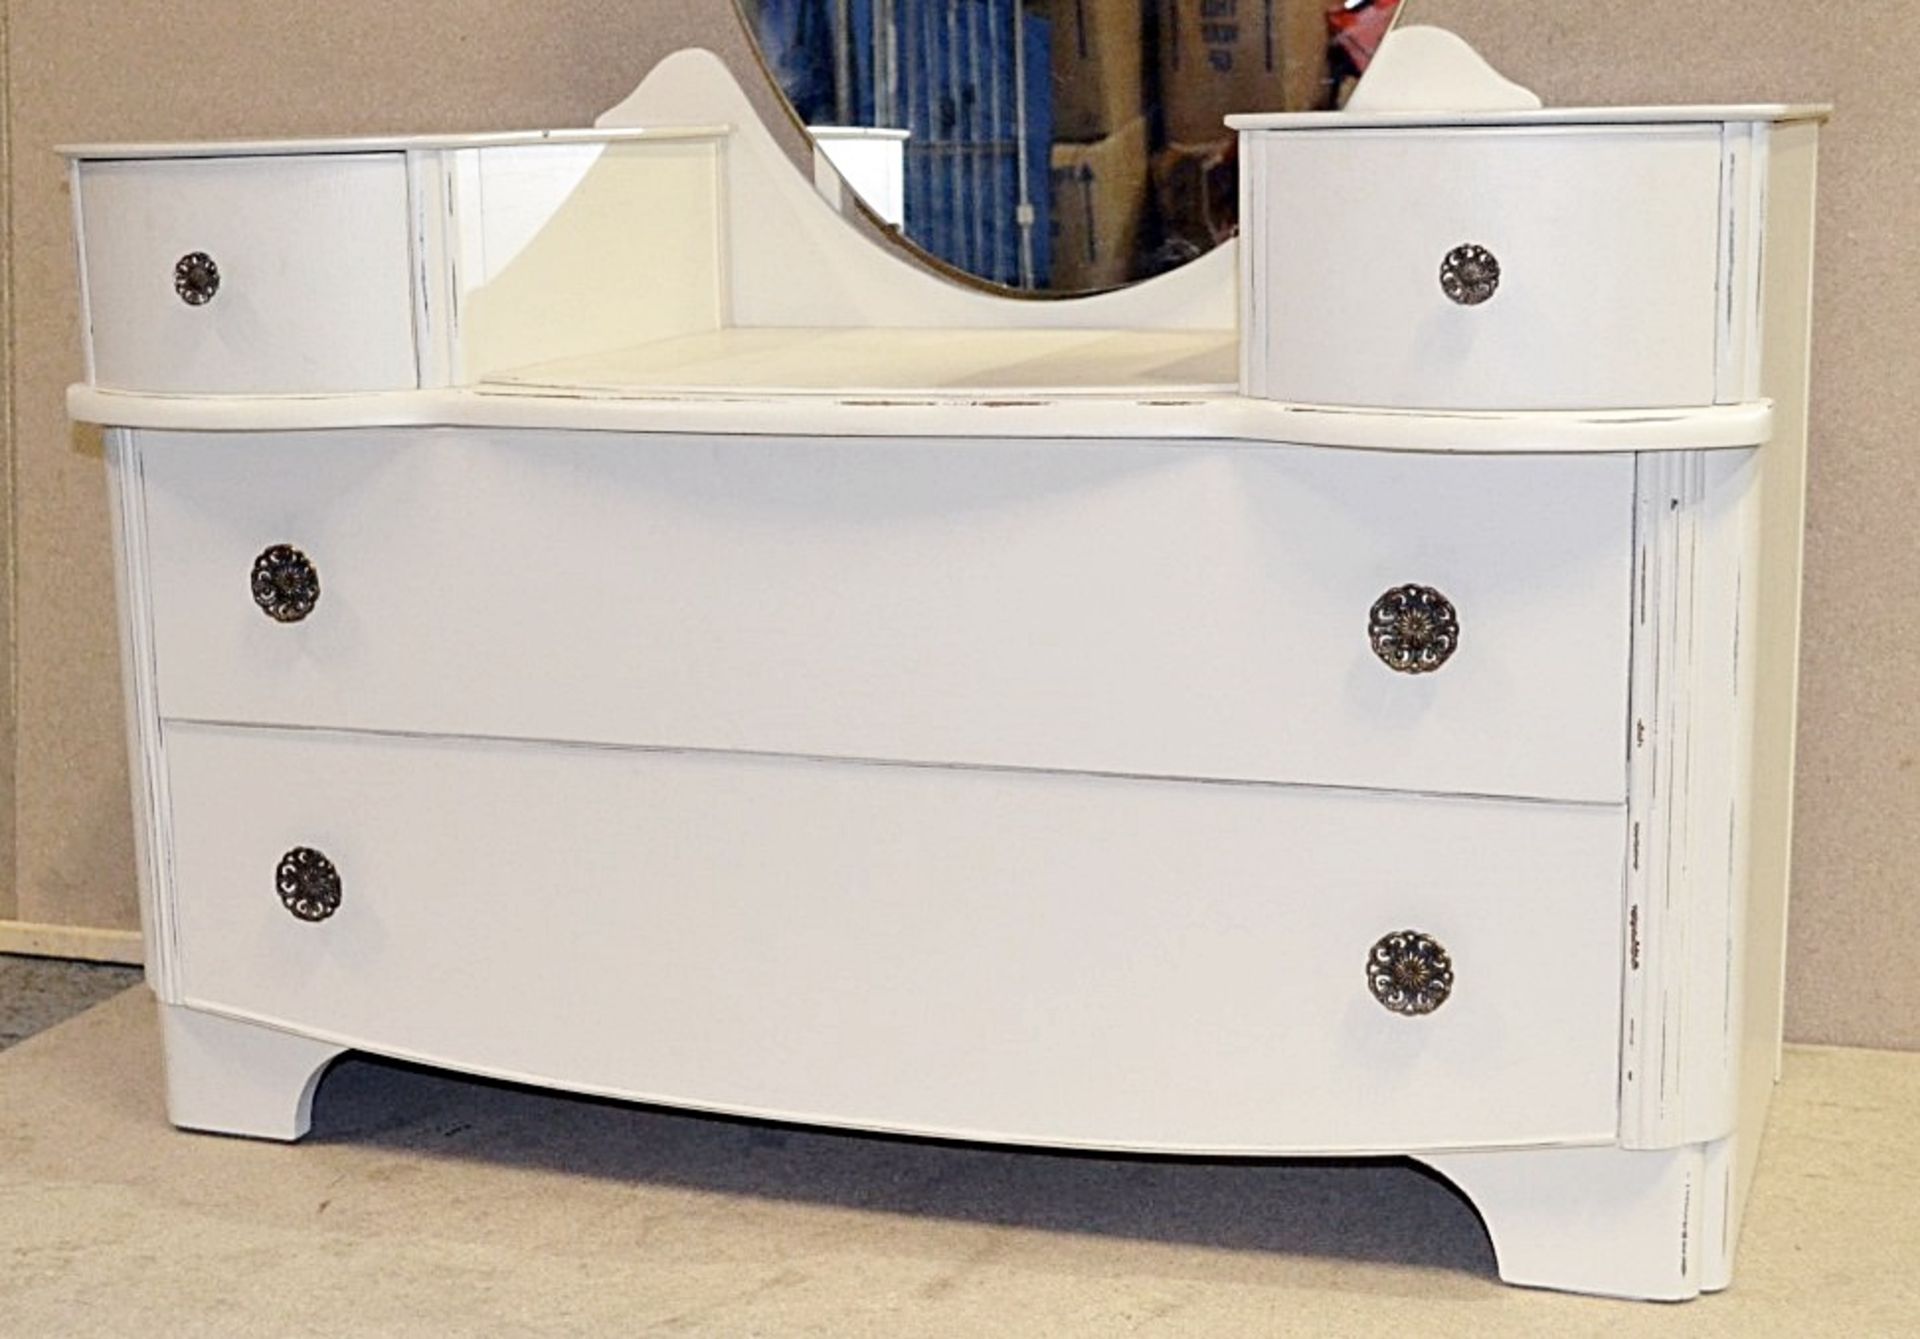 1 x Shabby Chic 4-Drawer Dressing Table With Oval Mirror - Features Cream Paintwork With An - Image 6 of 9